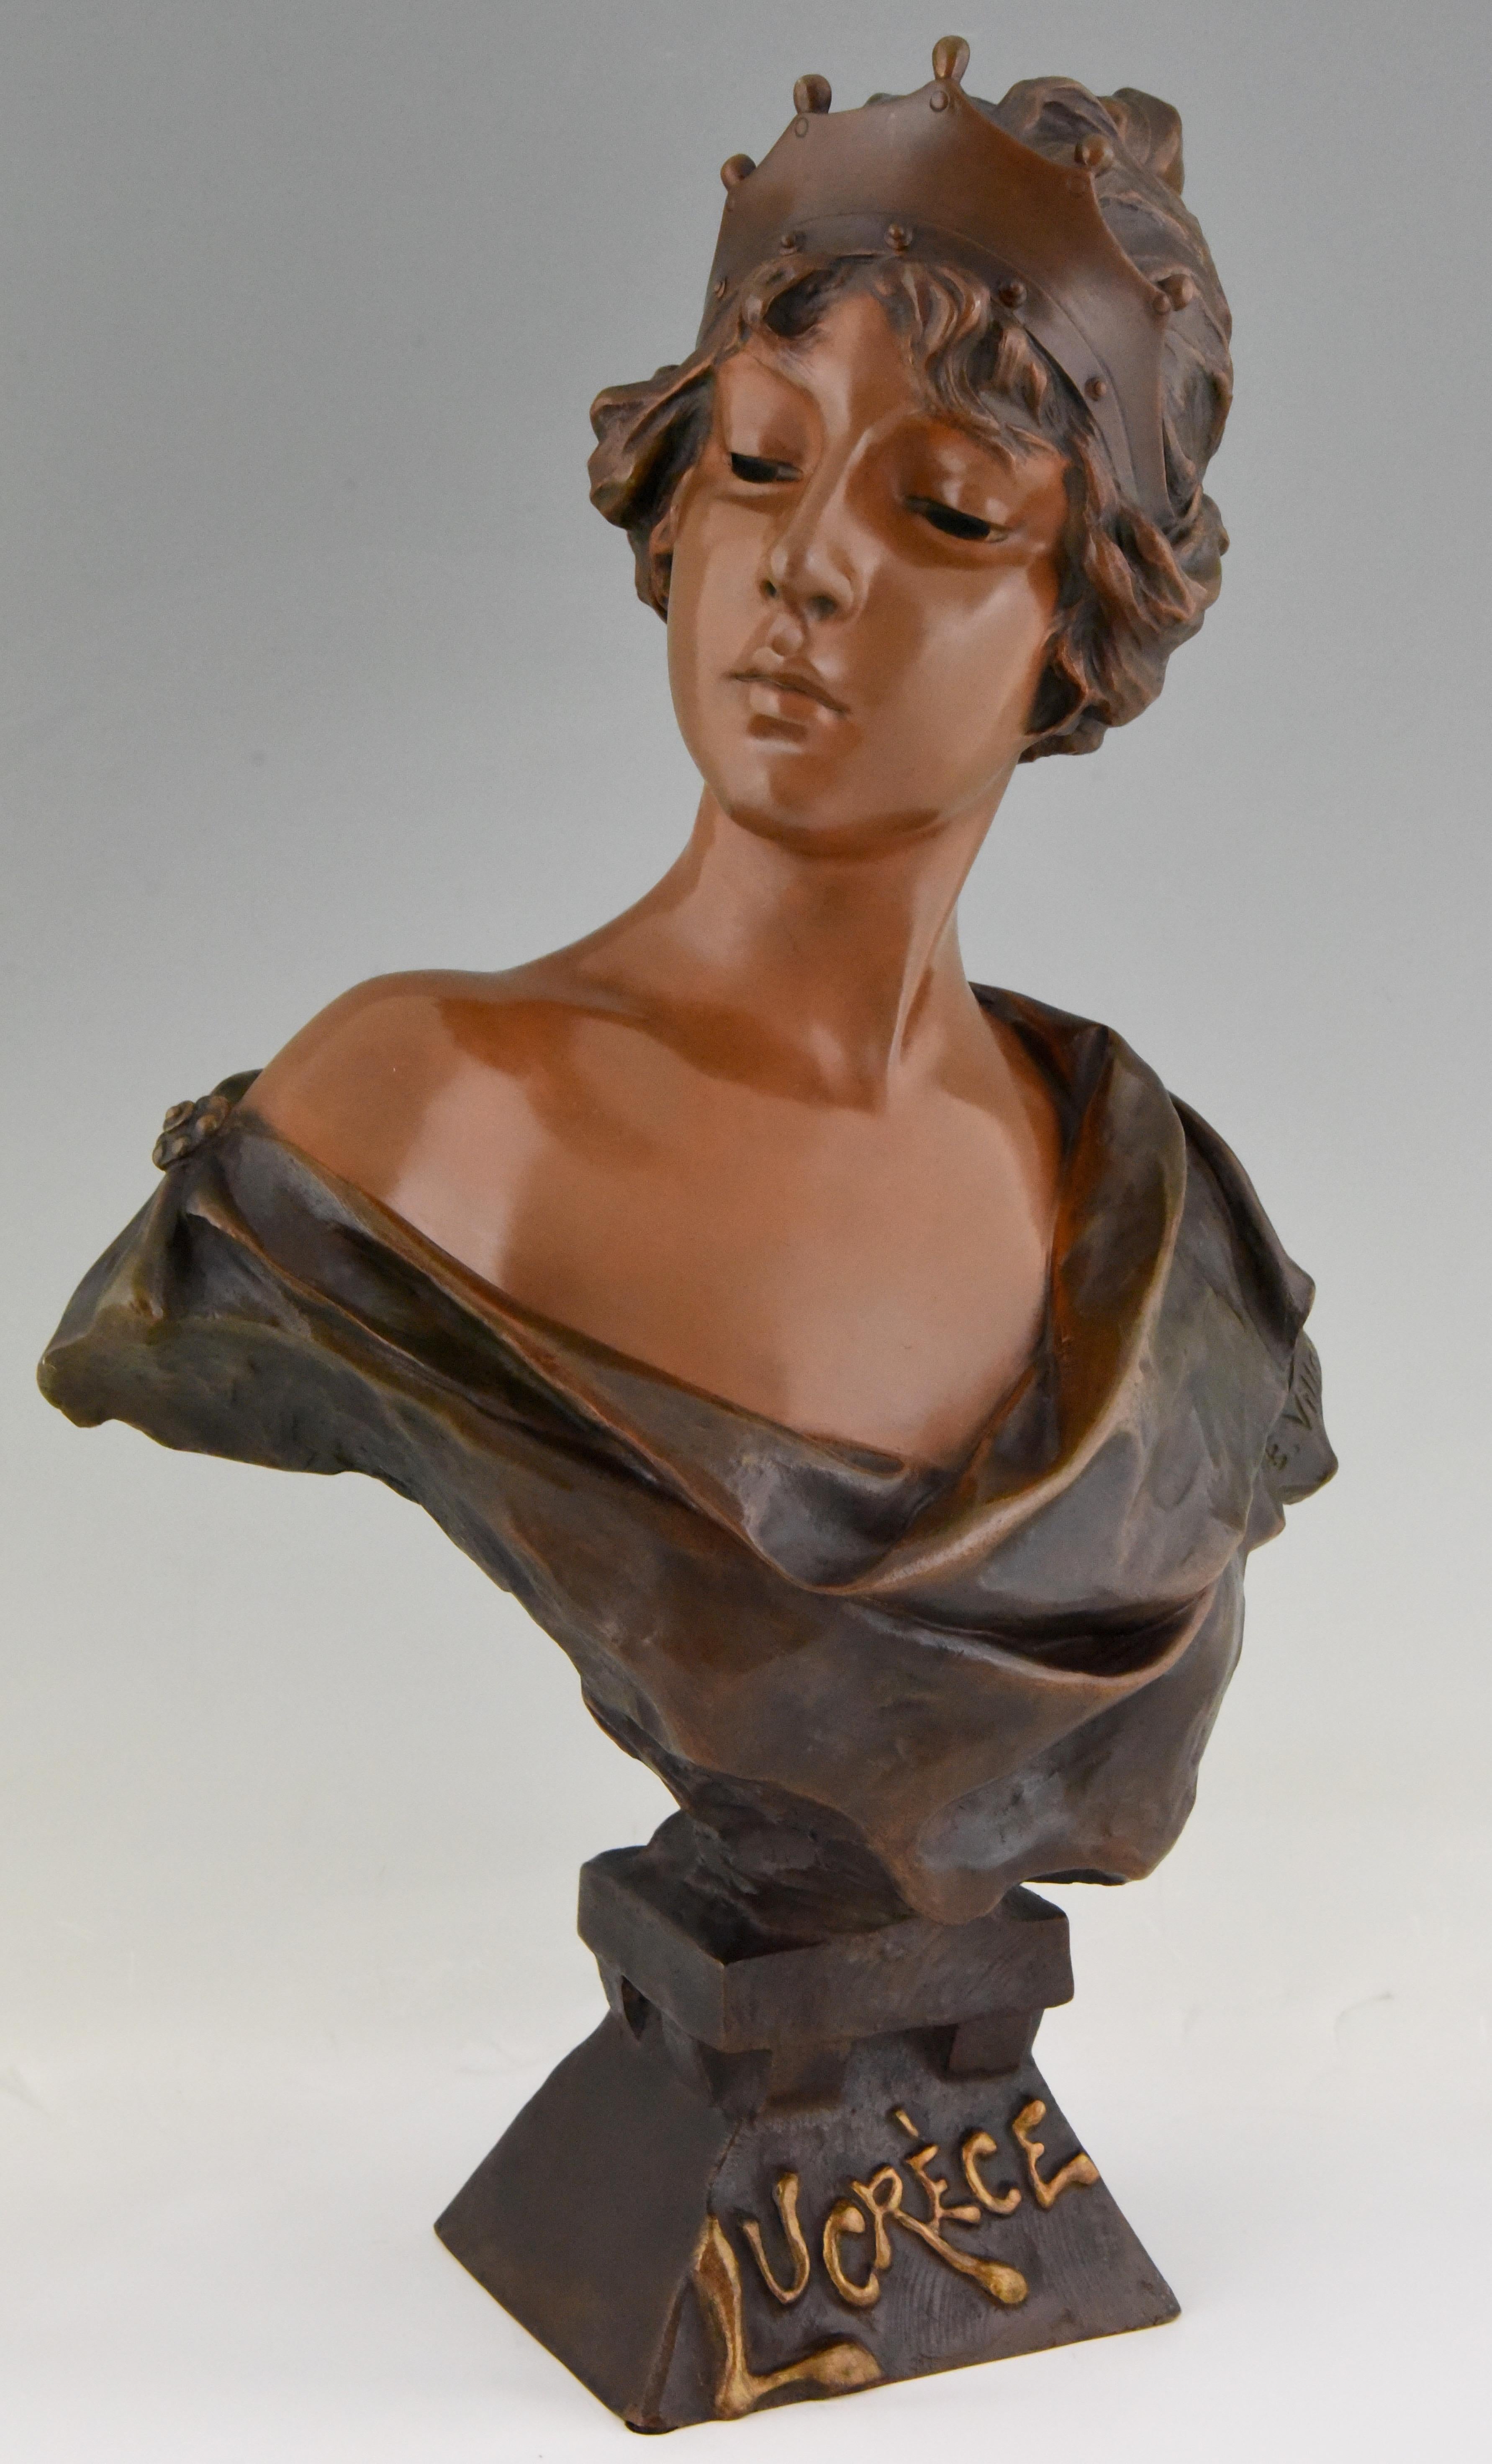 Art Nouveau bronze sculpture, bust of a woman with crown, titled Lucrece by the French sculptor Emmanuel Villanis. Beautiful multi-color patina. Signed and with foundry marks, circa 1898.

Illustration of this model on page 40 & 41 of? Emmanuel